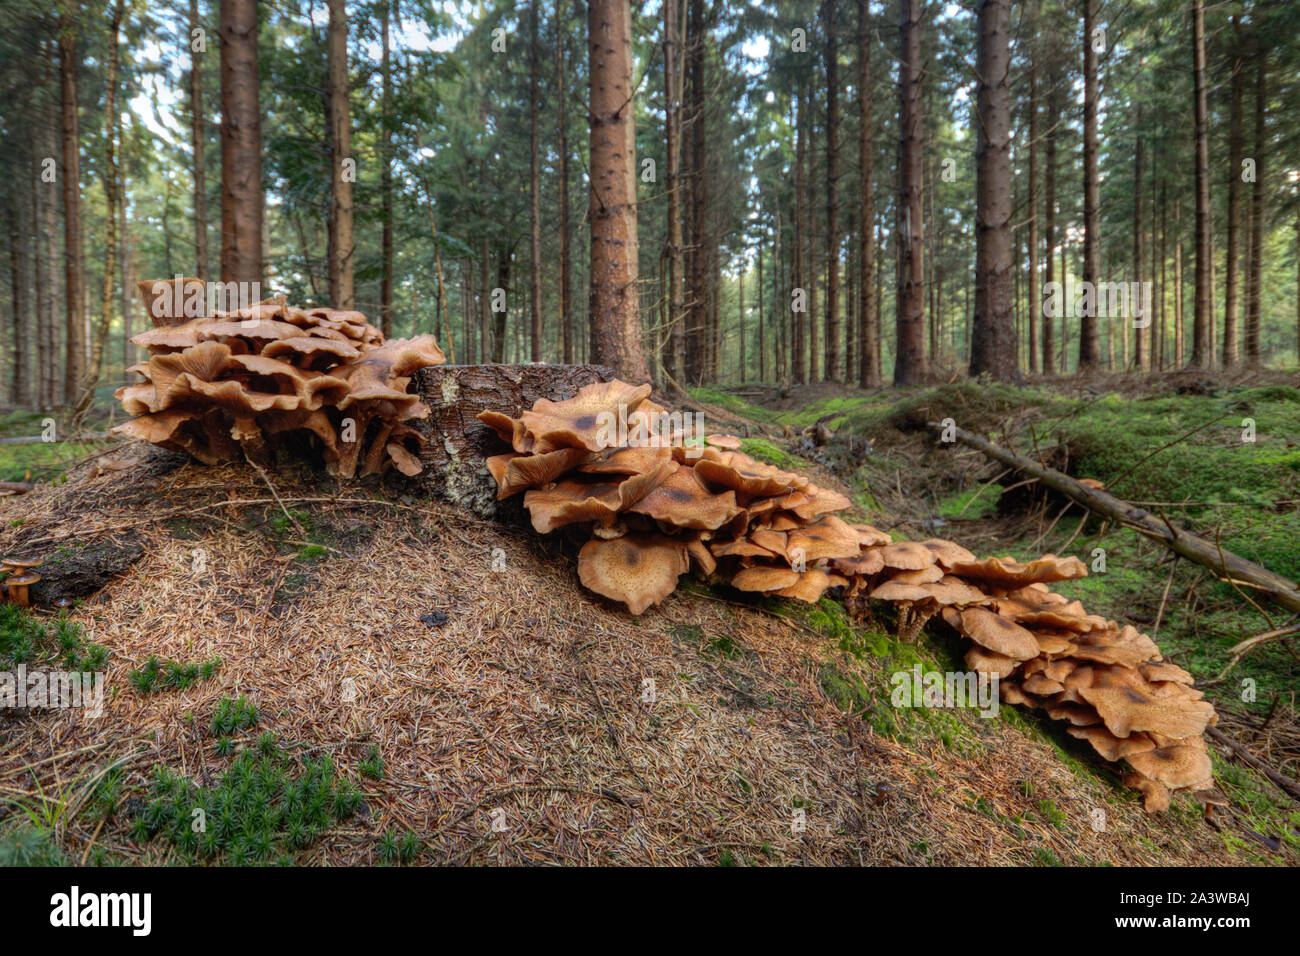 Group of Freckled dapperlings growing on the rotting trunk of a tree in a pine forest Stock Photo